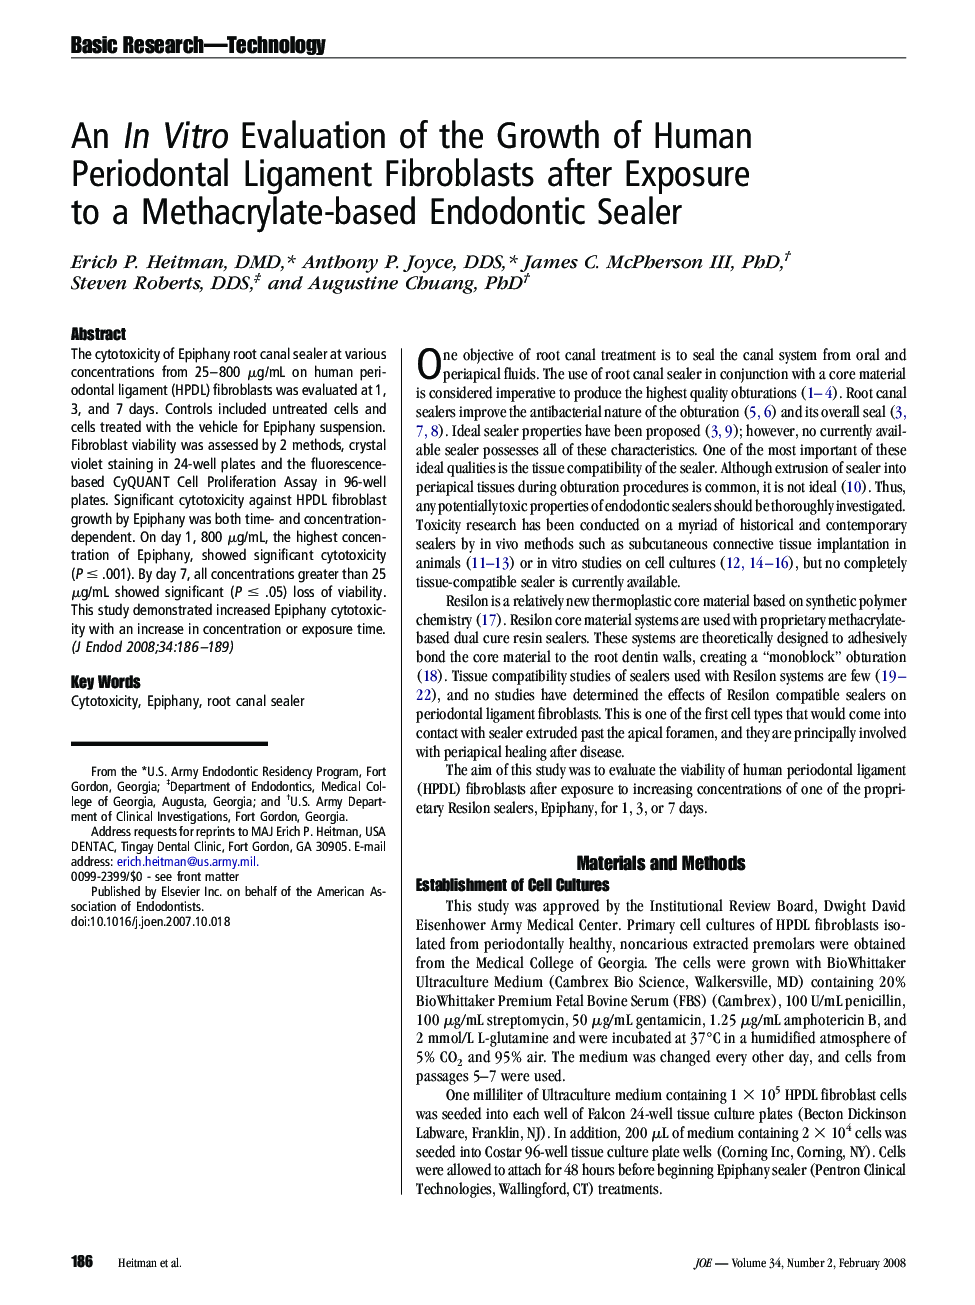 An In Vitro Evaluation of the Growth of Human Periodontal Ligament Fibroblasts after Exposure to a Methacrylate-based Endodontic Sealer